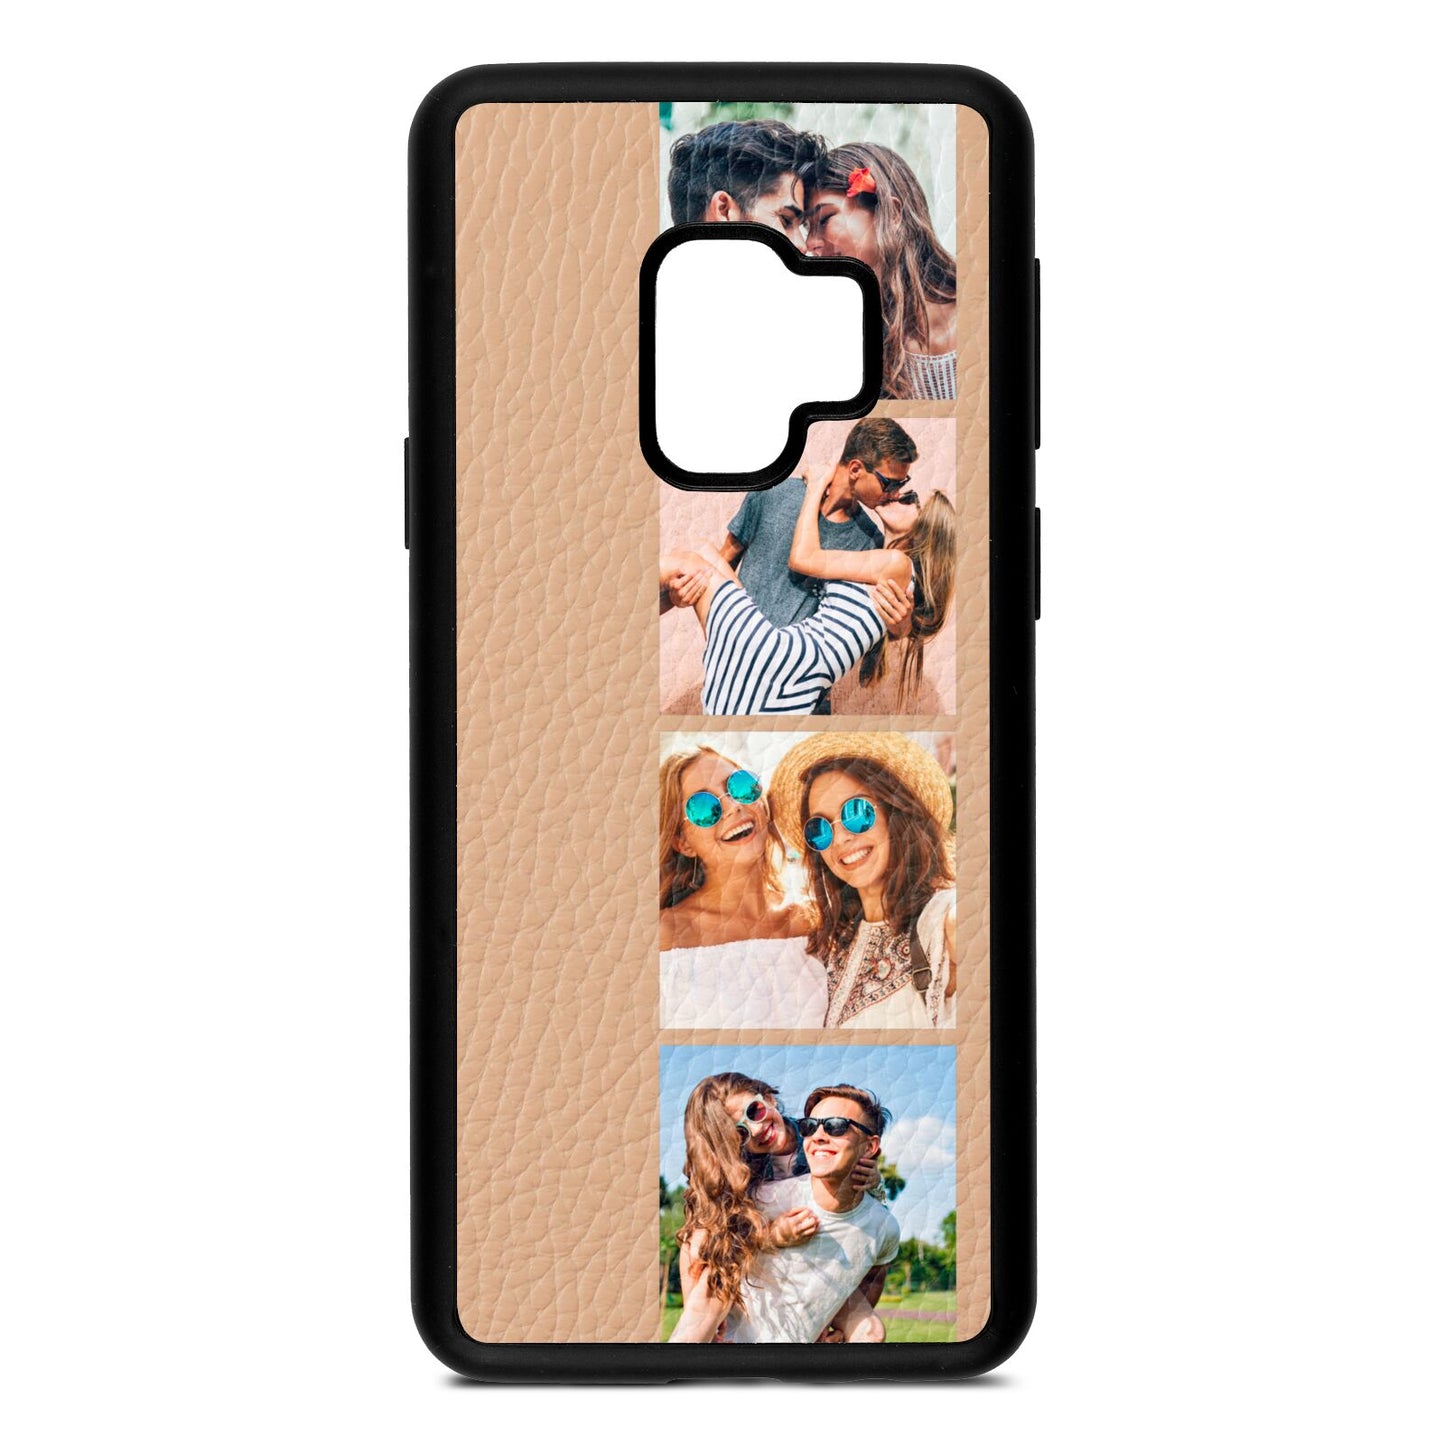 Photo Strip Montage Upload Nude Pebble Leather Samsung S9 Case